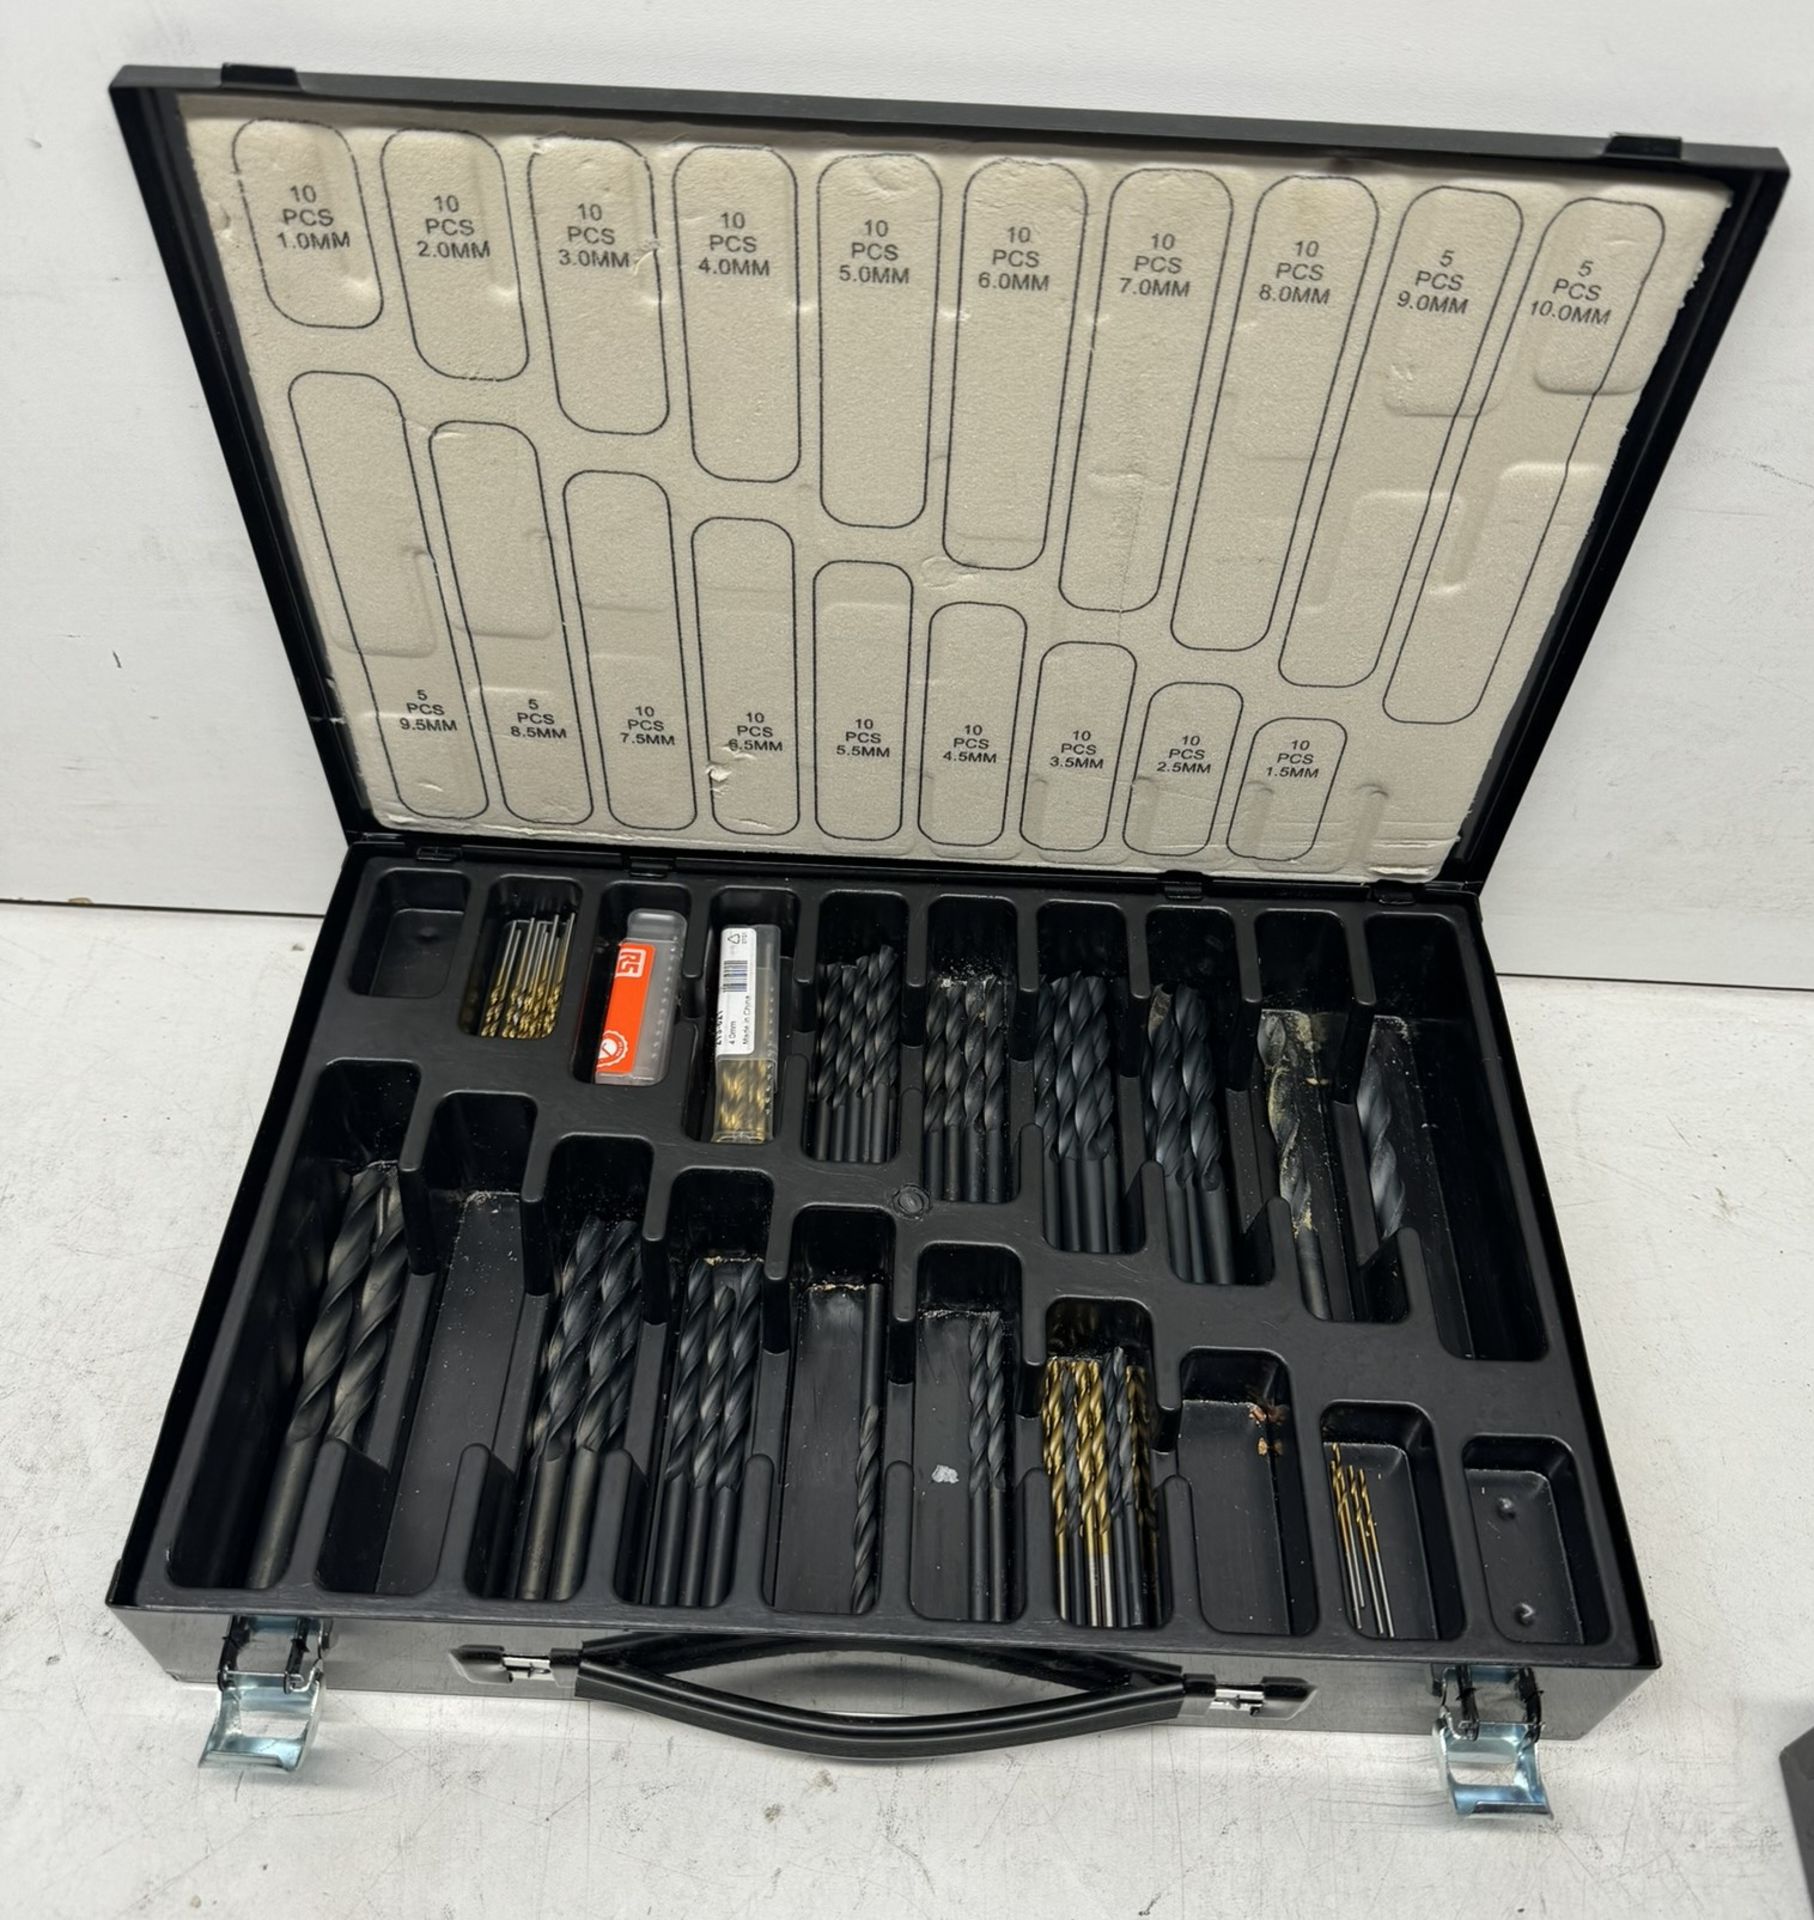 2 x Incomplete Drill Bit Sets With Case As Seen In Photos - Image 3 of 5